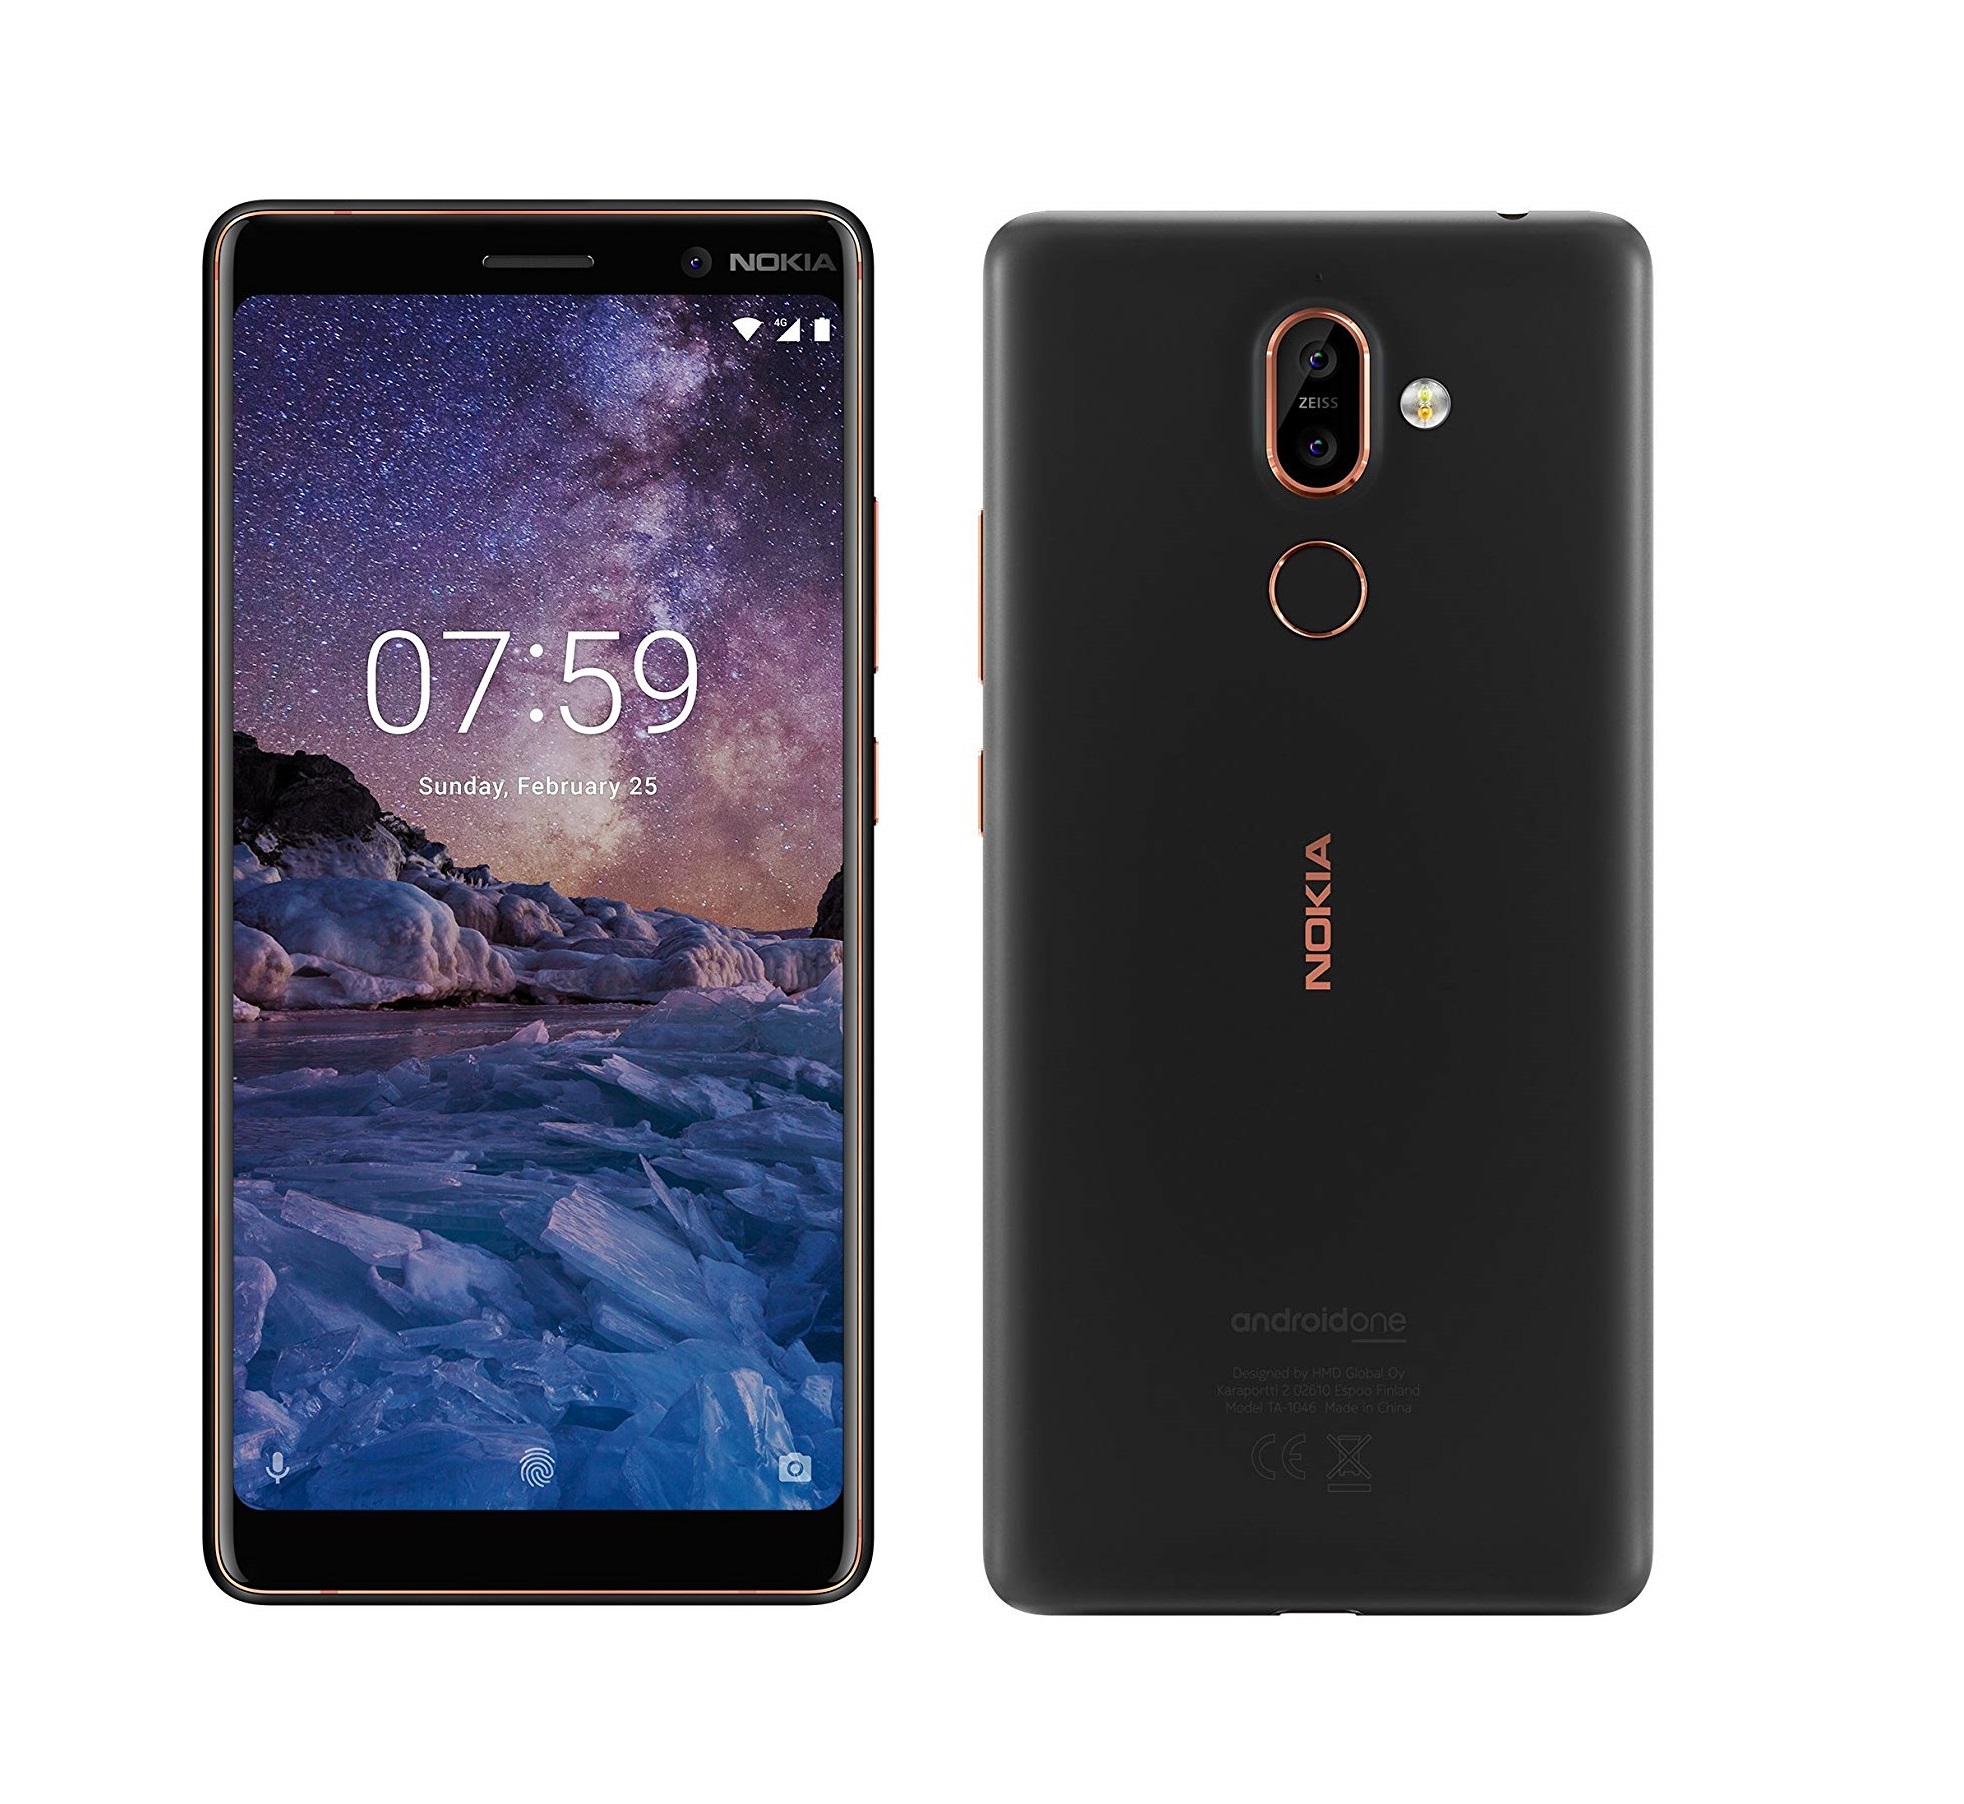 Nokia 7 Plus Smartphone with 4GB RAM, 64GB Internal Memory and 4G LTE Connectivity